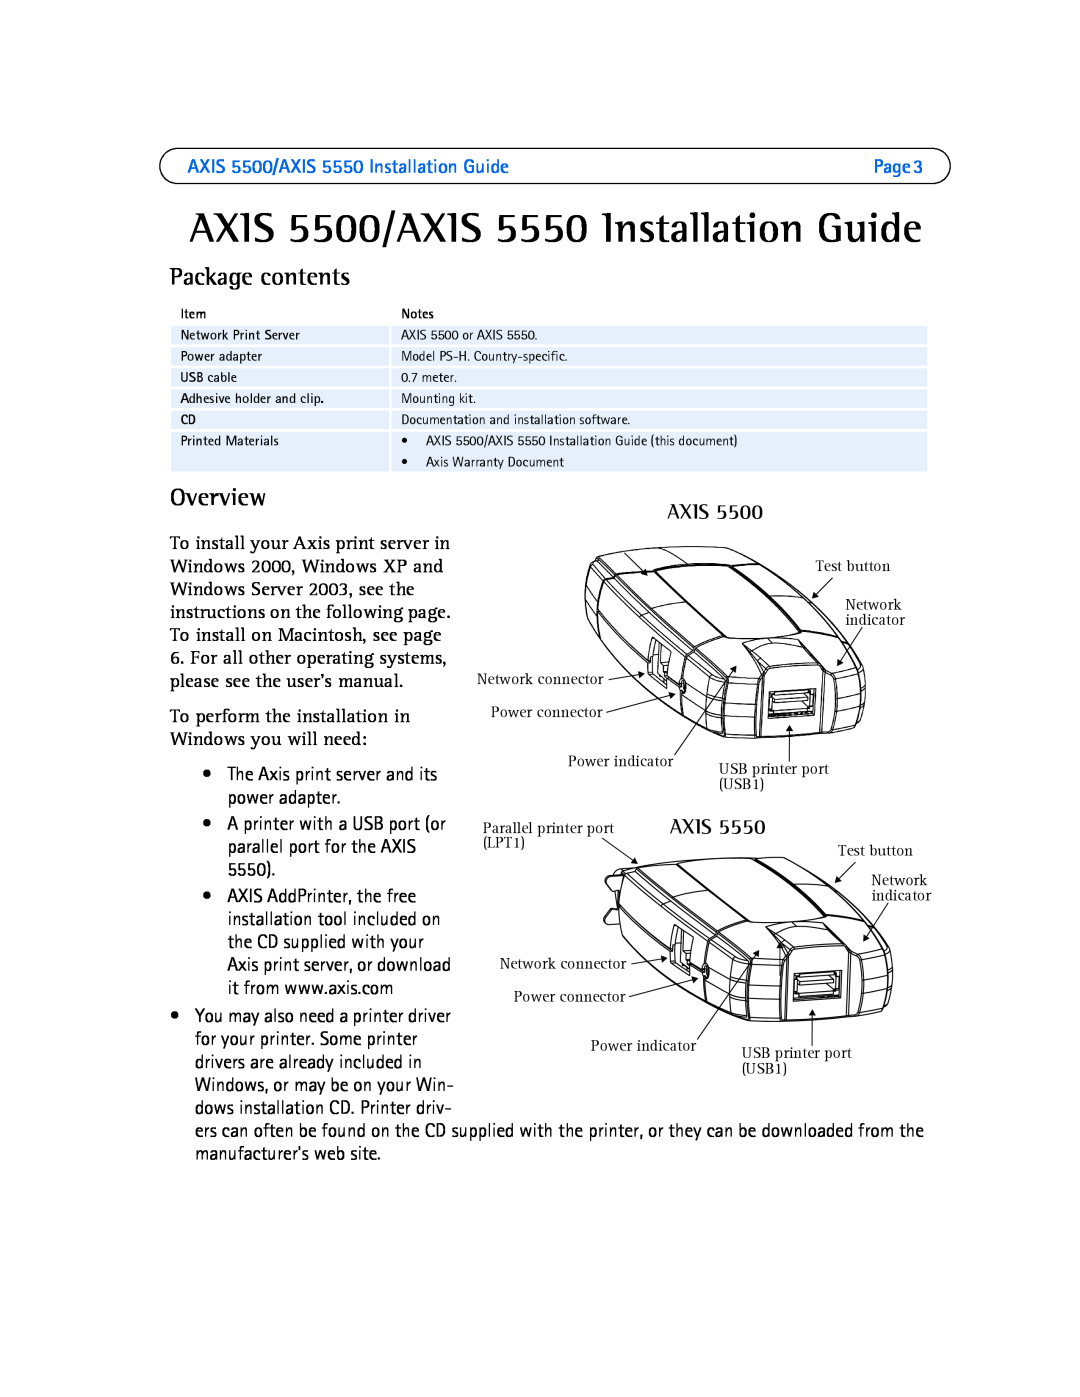 Axis Communications AXIS 5500/AXIS 5550 Installation Guide, Package contents, Overview, Axis, Power indicator, USB1 